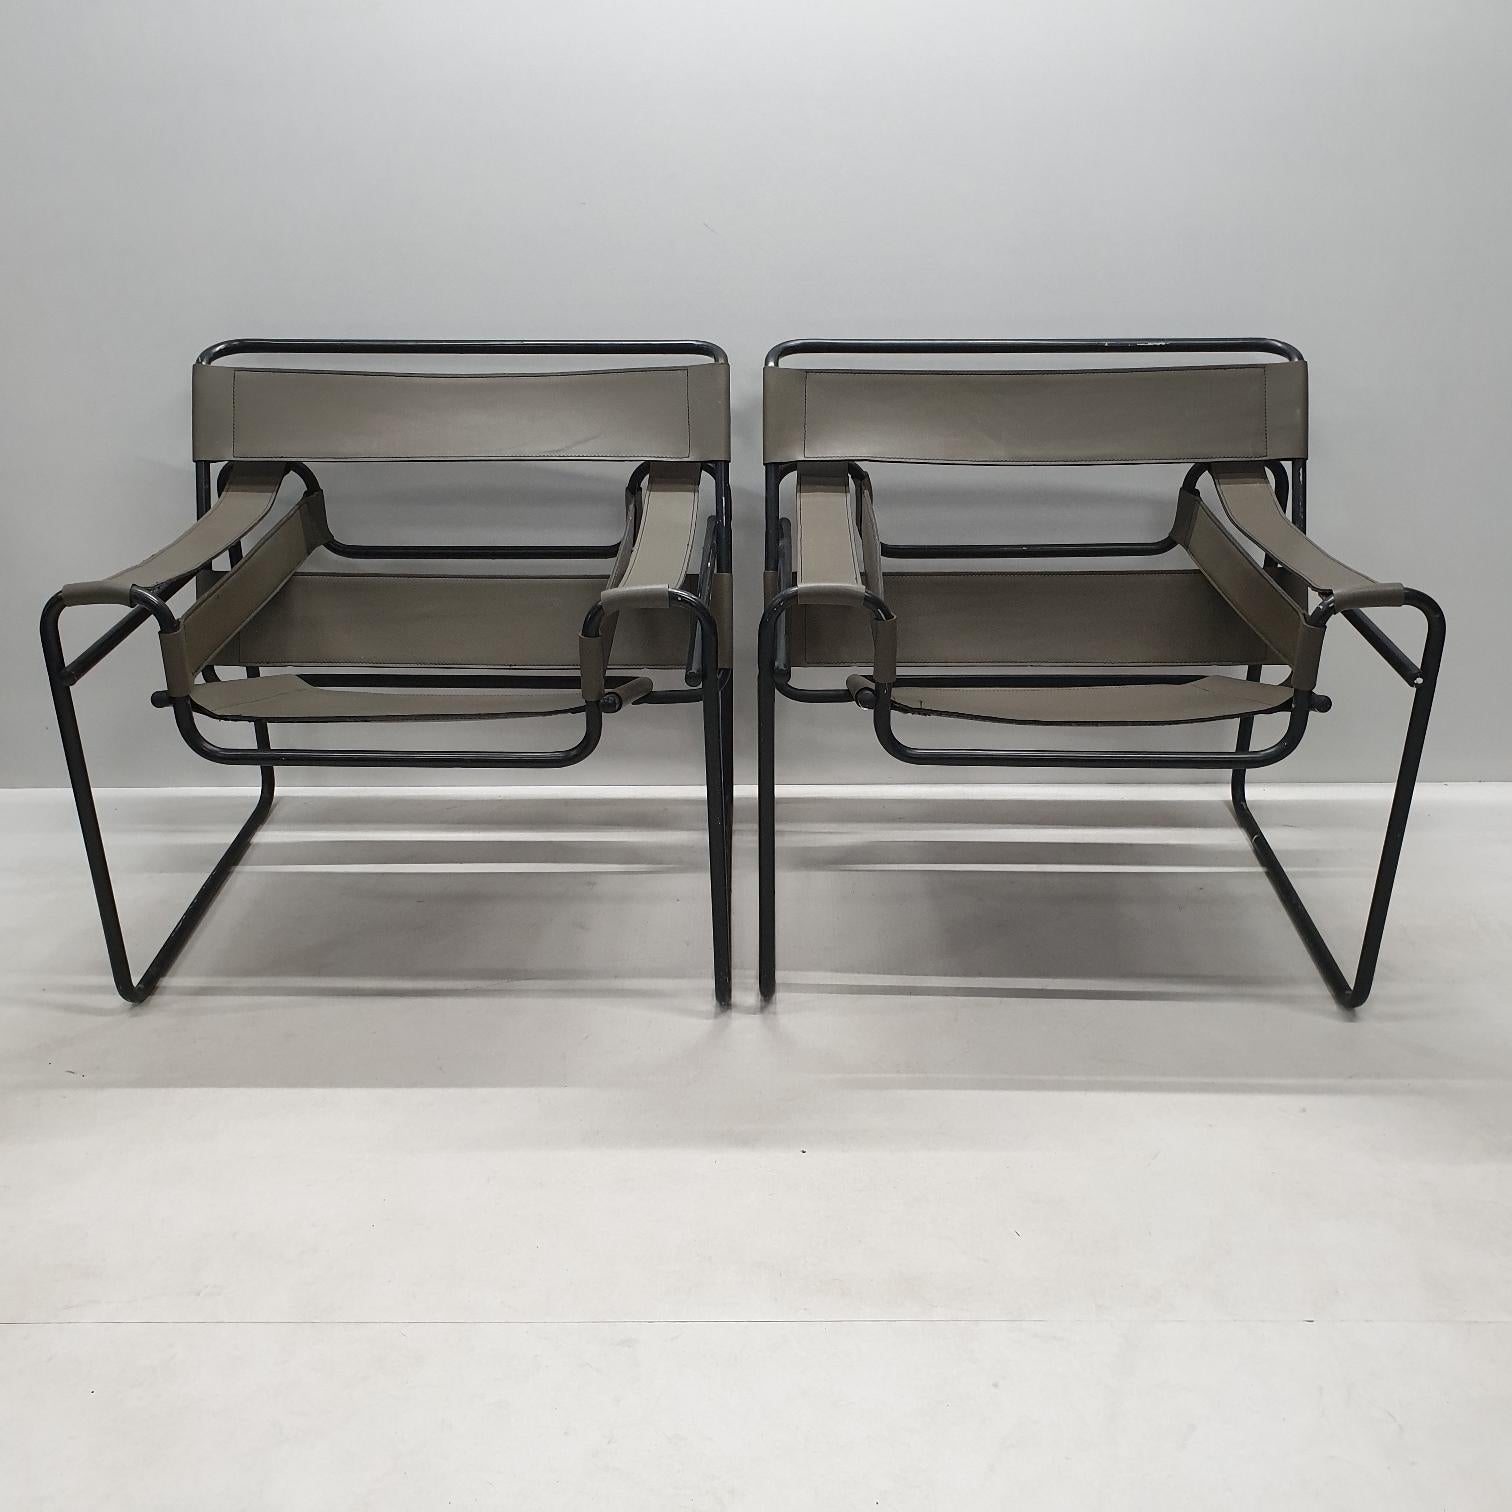 Italian Pair of Wassily B3 Chairs with Rare Black Frame by Marcel Breuer for Gavina